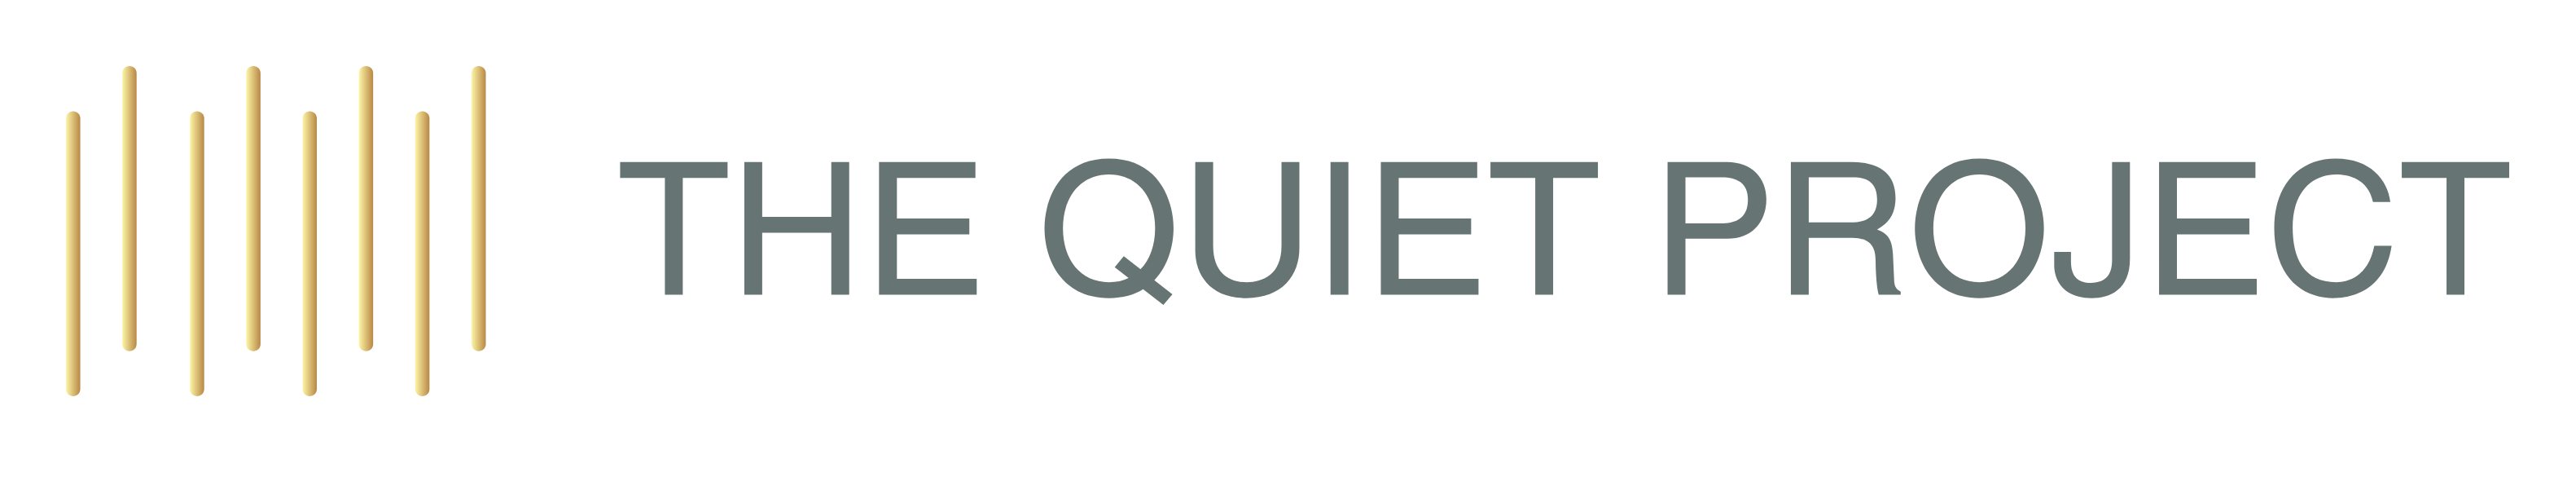 The Quiet Project Logo